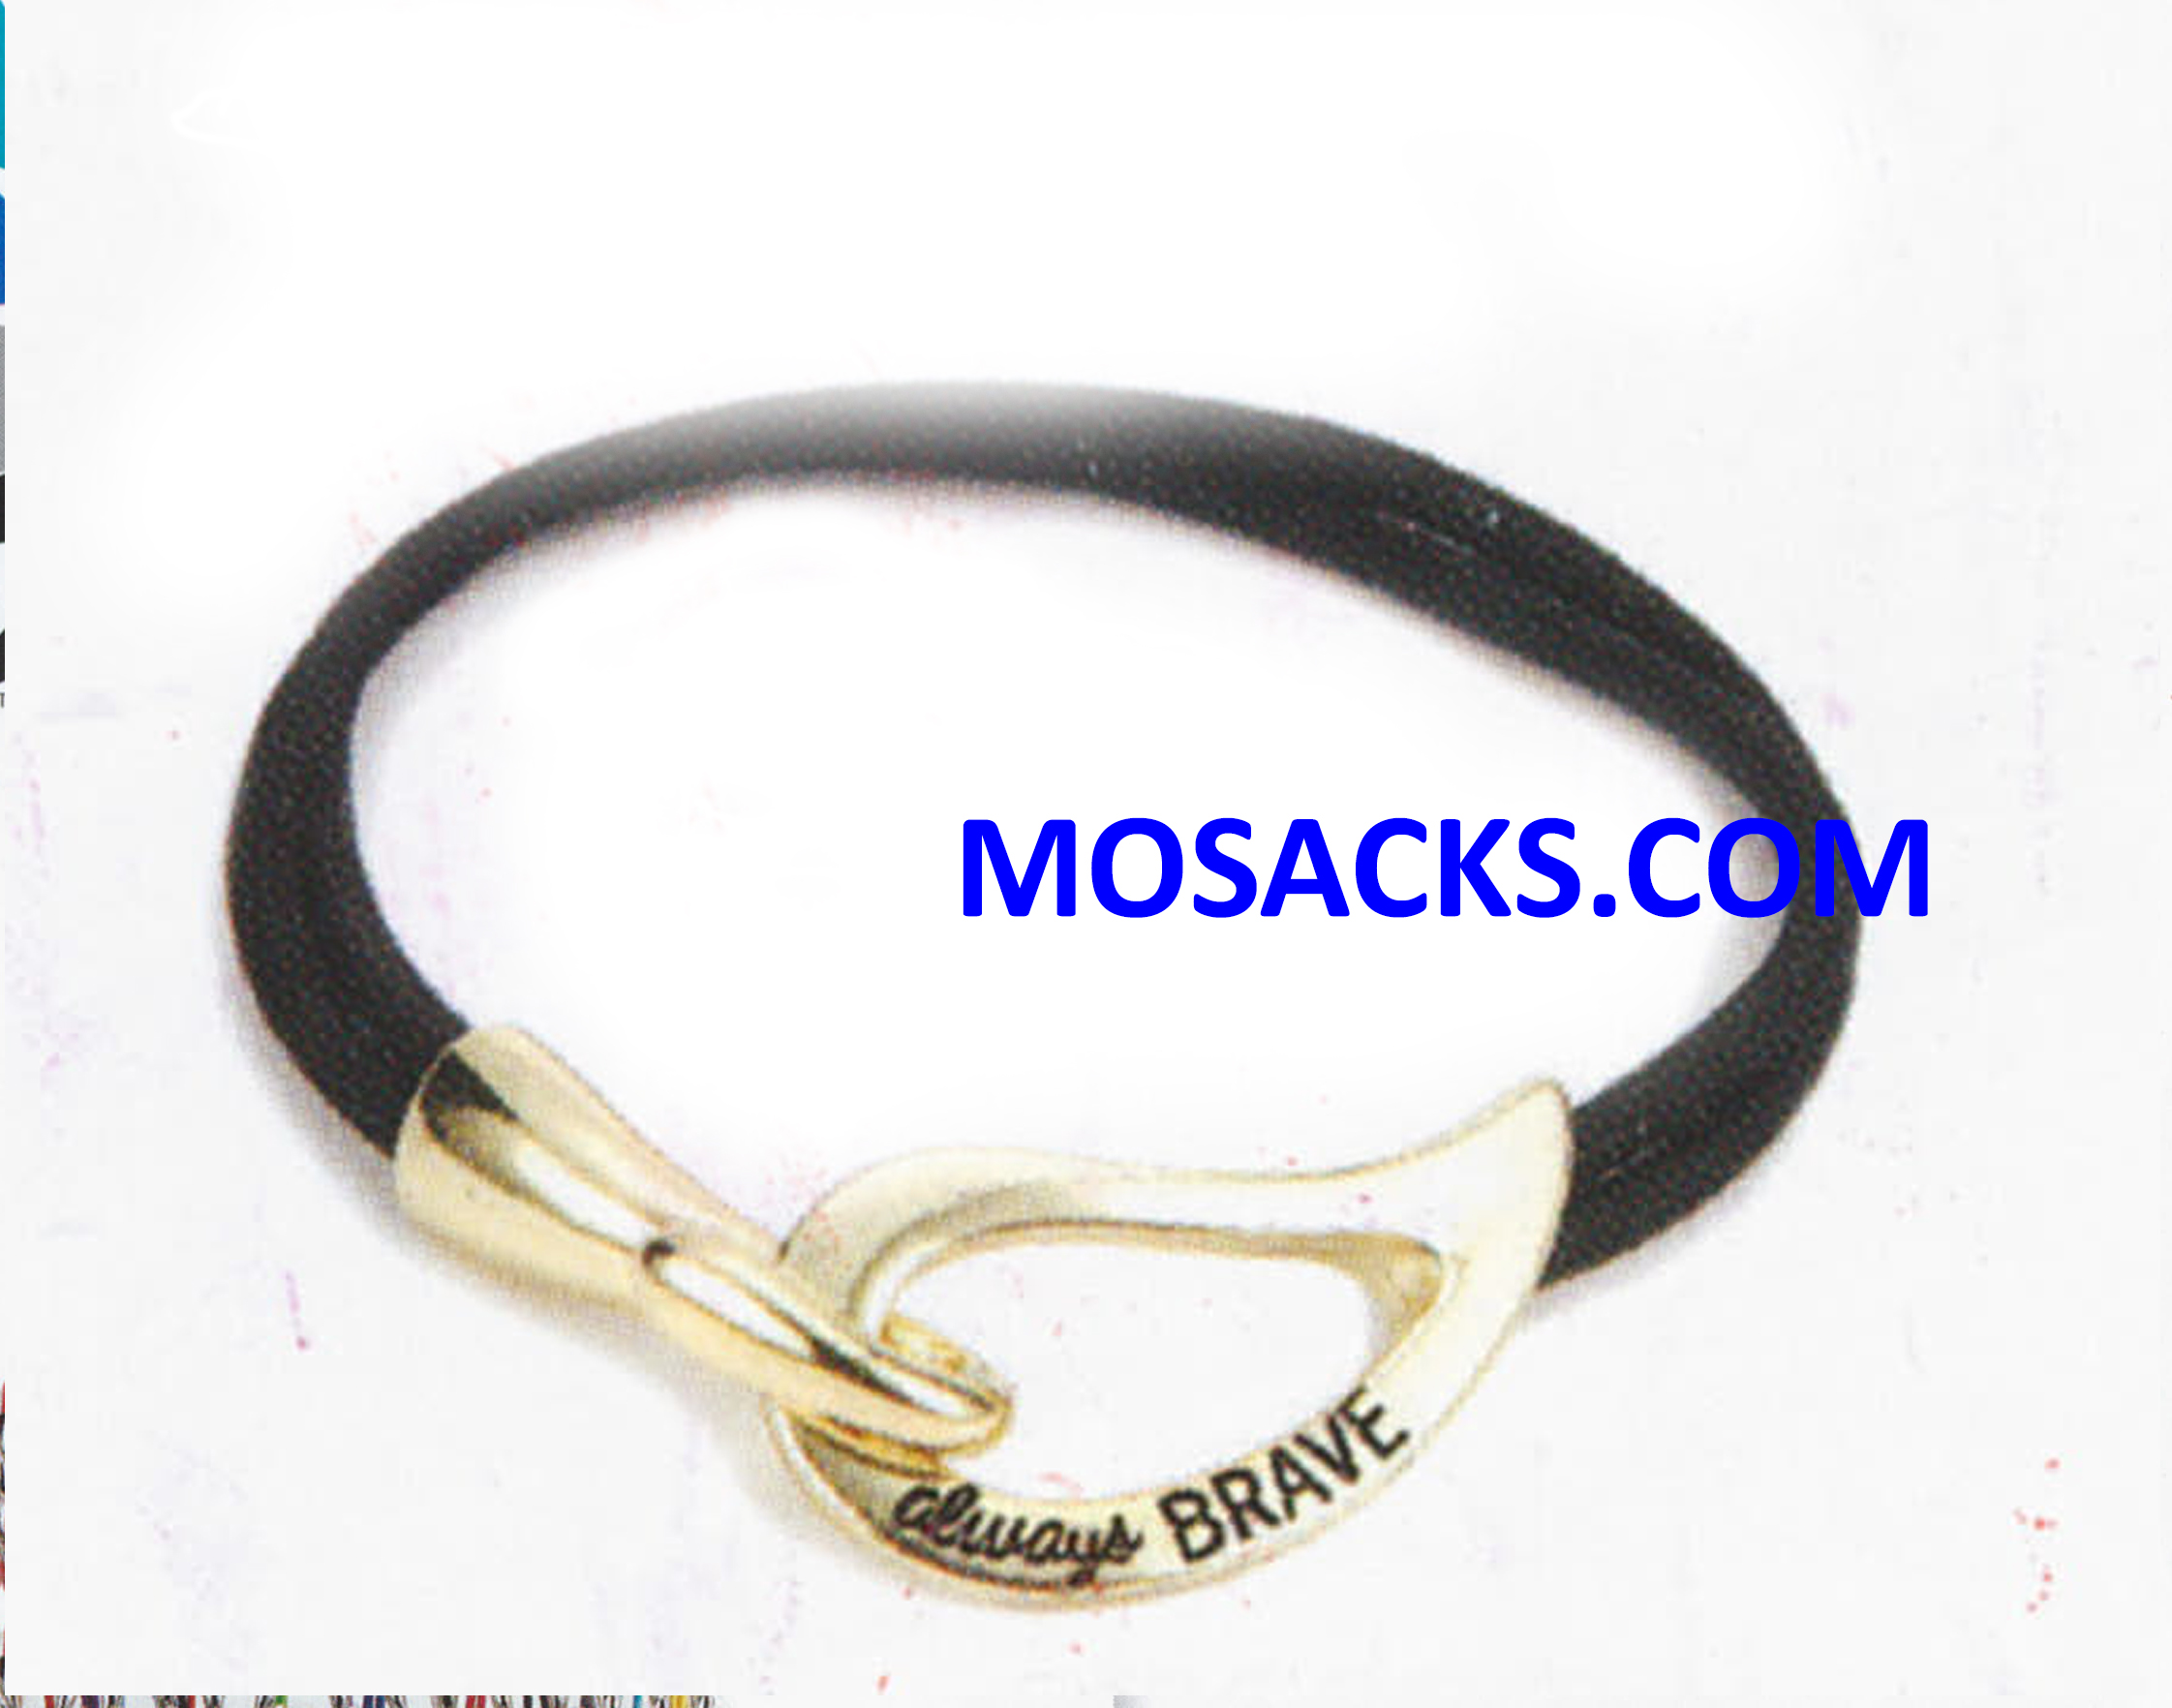 Alexa's Angels Always Brave Cancer Awareness Bracelet Gold Black 452-220847 an Alexa's Angels Awareness Bracelet for Melanoma patients